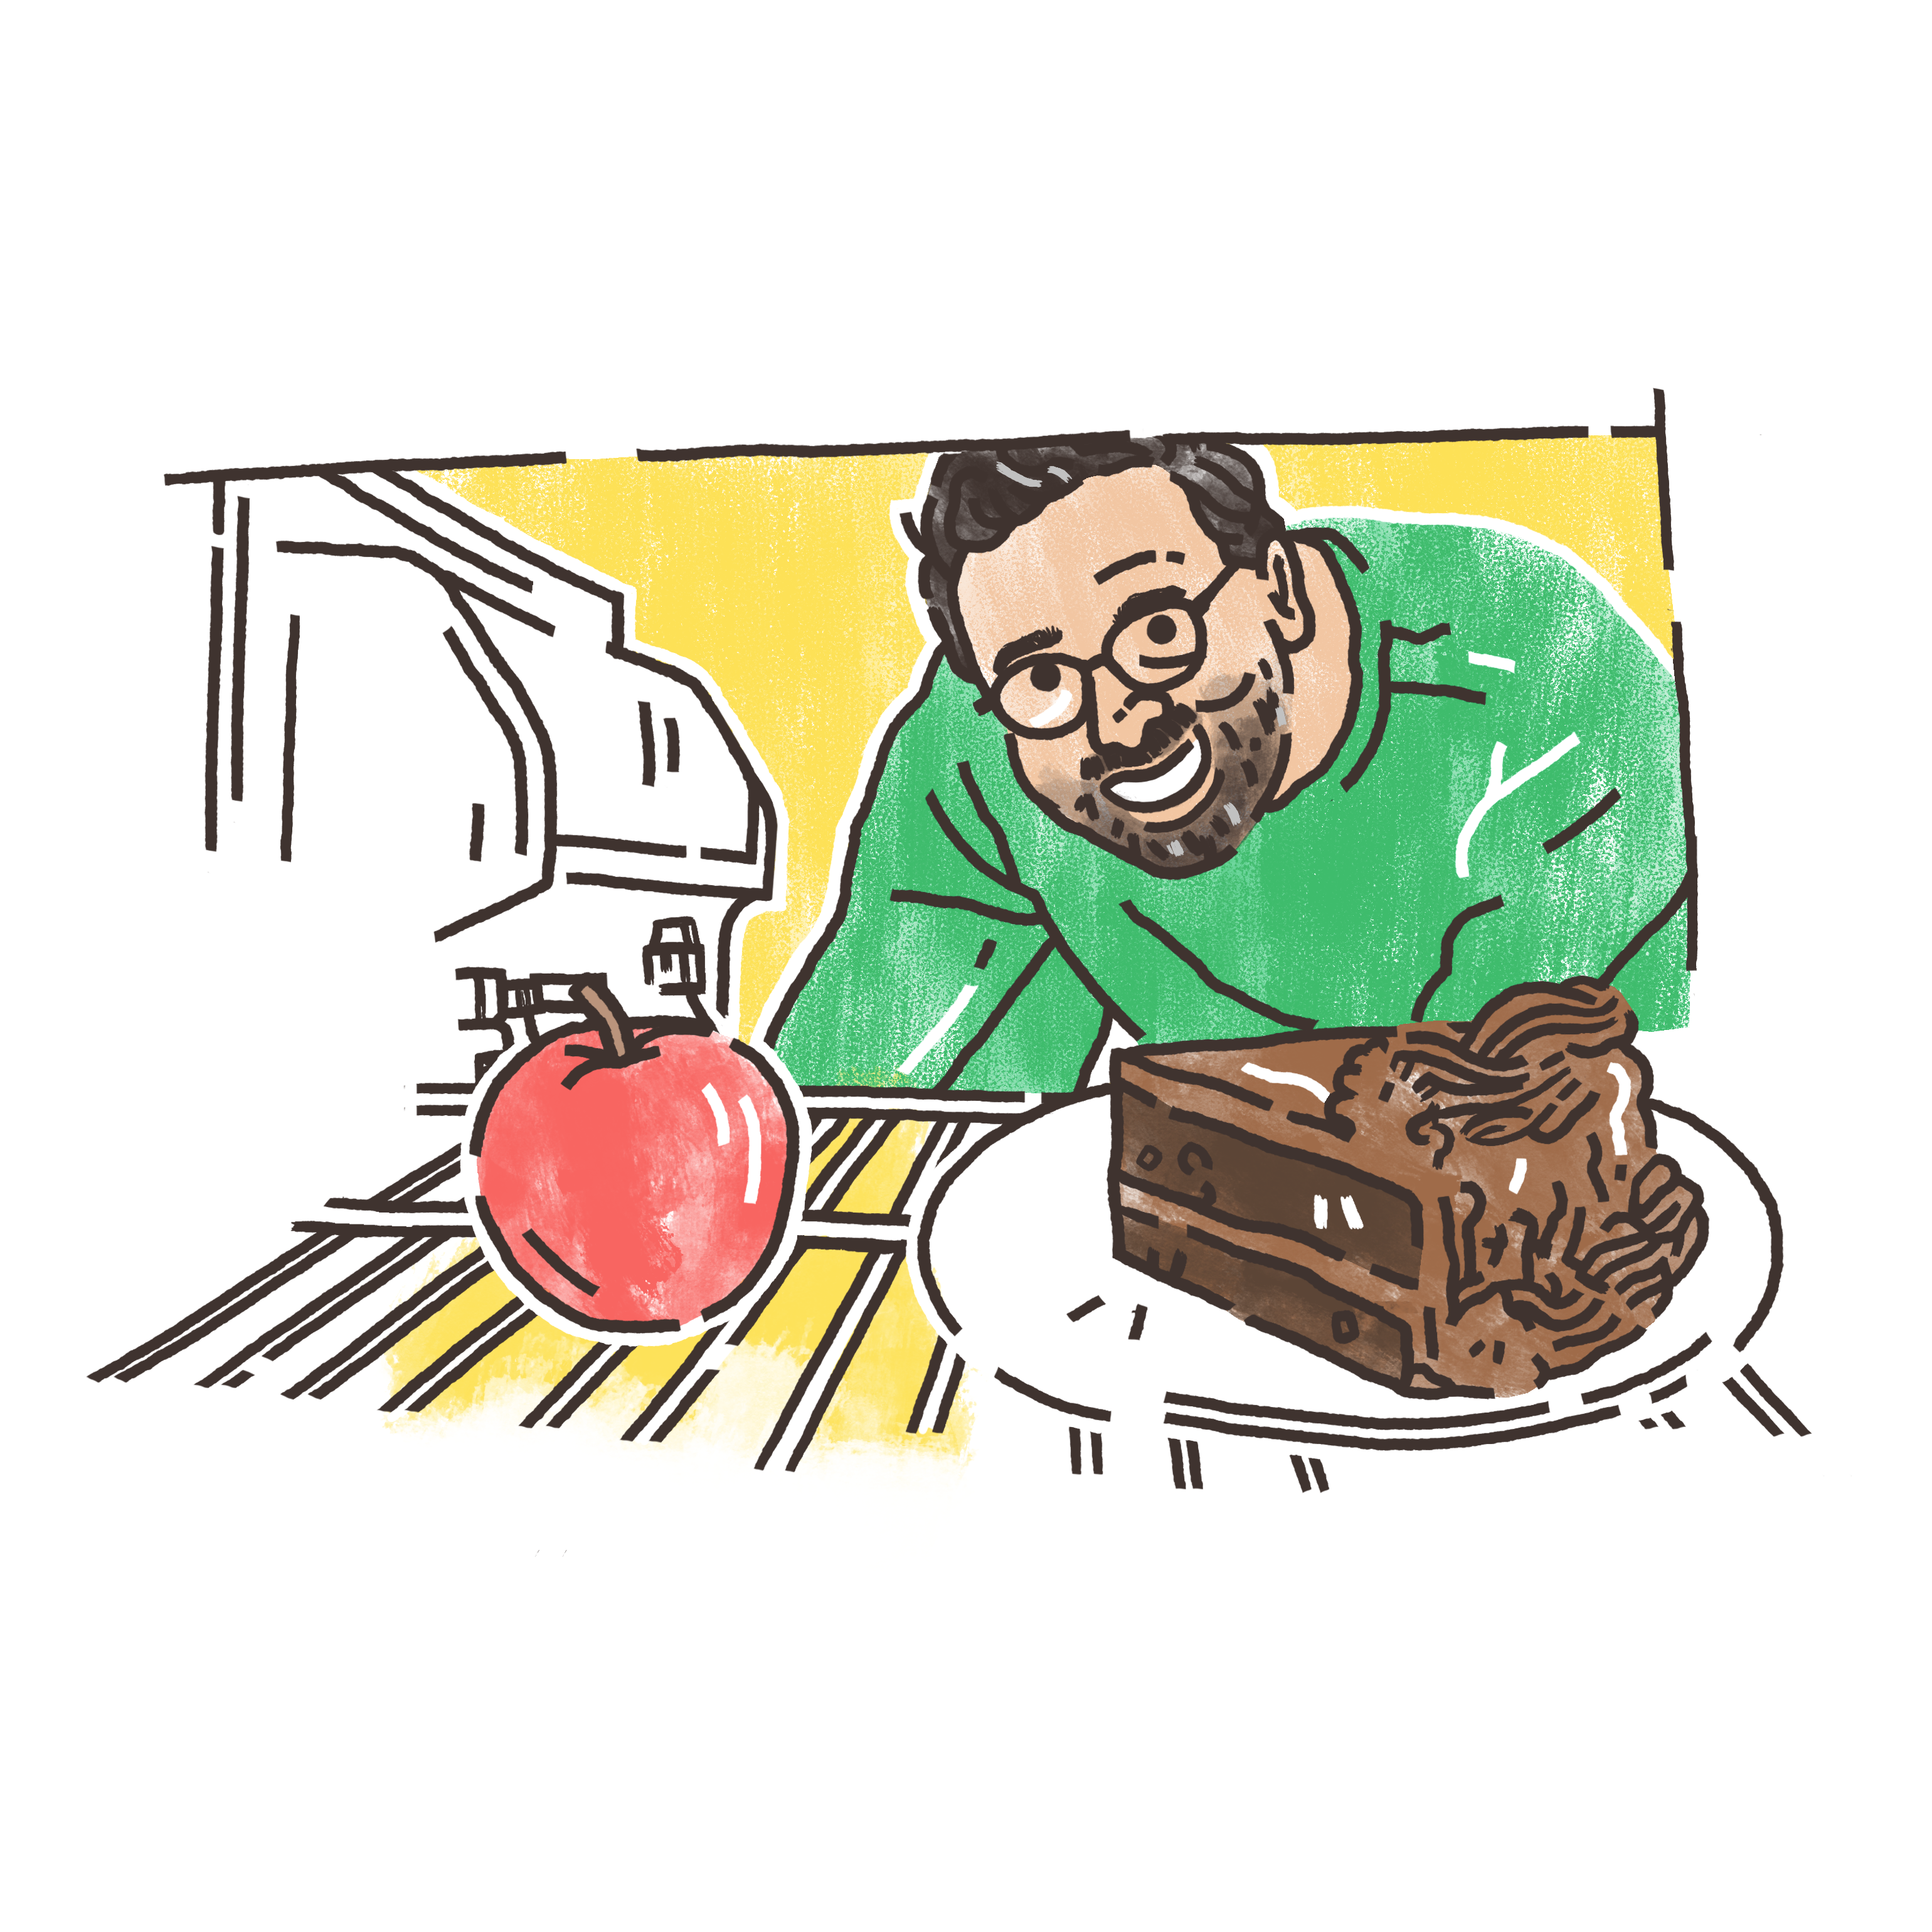 A man looking inside the fridge. There are two food options- an apple and a slice of chocolate cake.